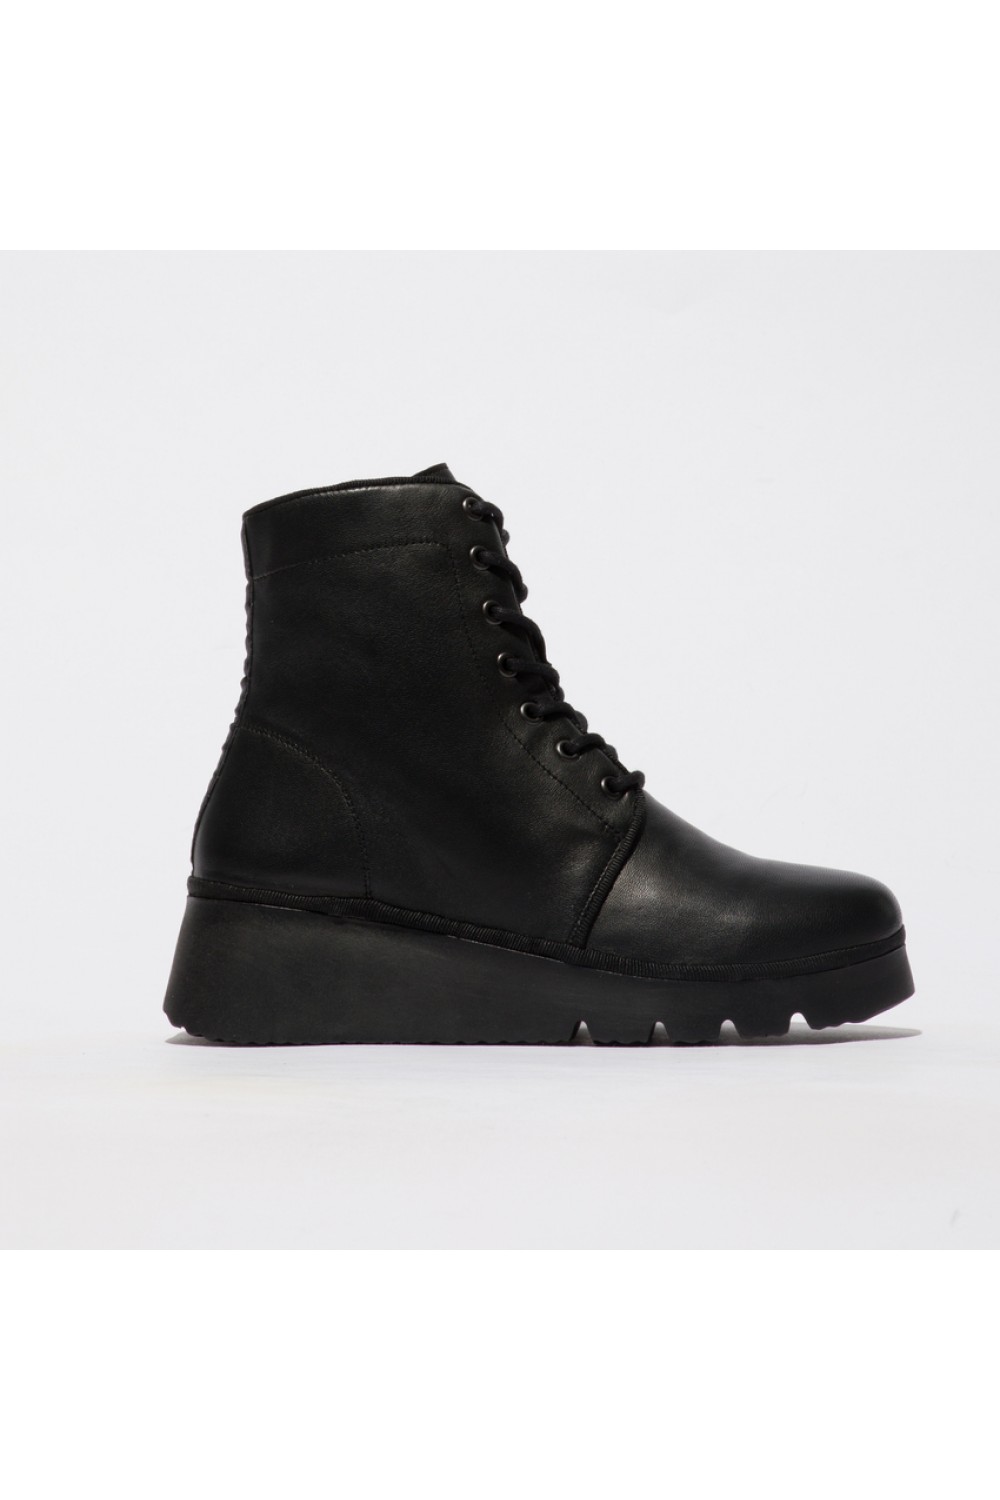 Fly Mes 2 | Fly London Boots | Free UK Delivery at Mastershoe